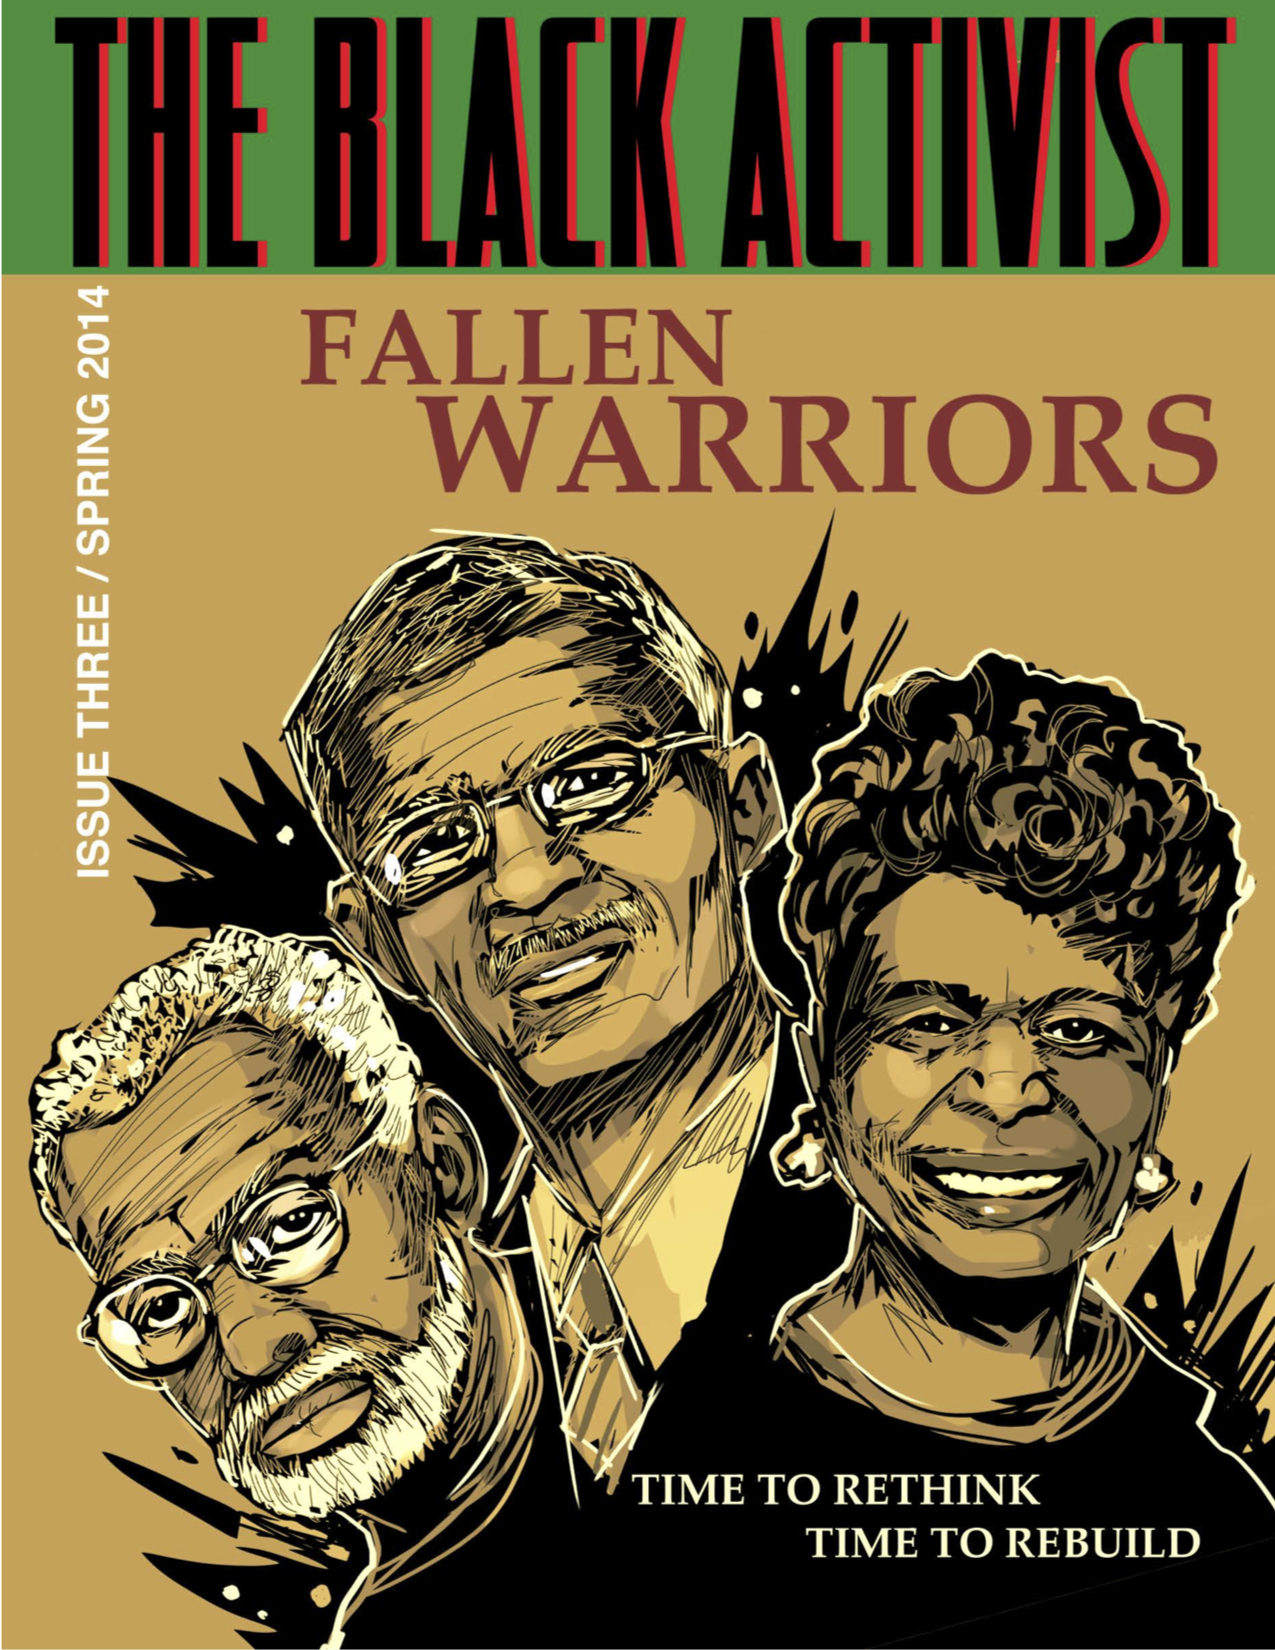 The Black Activist issue 3 front cover